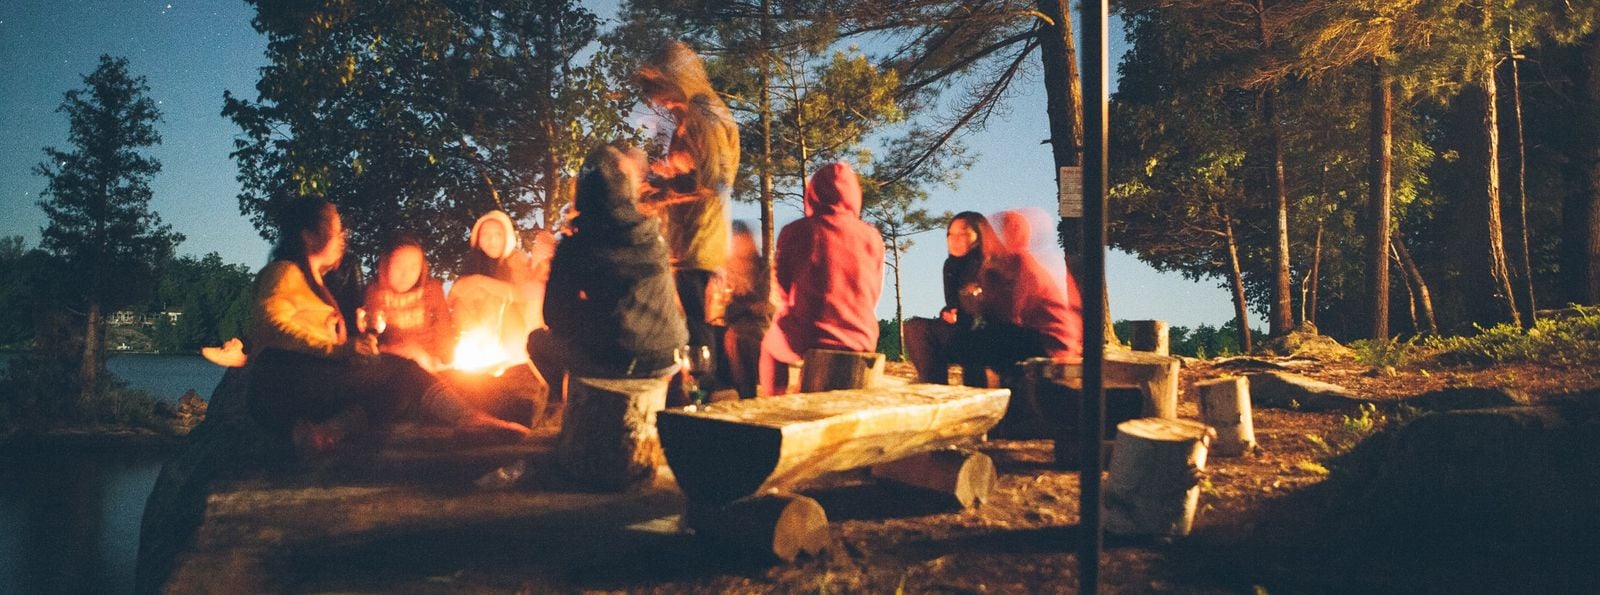 group of people camping in ontario around fire on log benches (2)